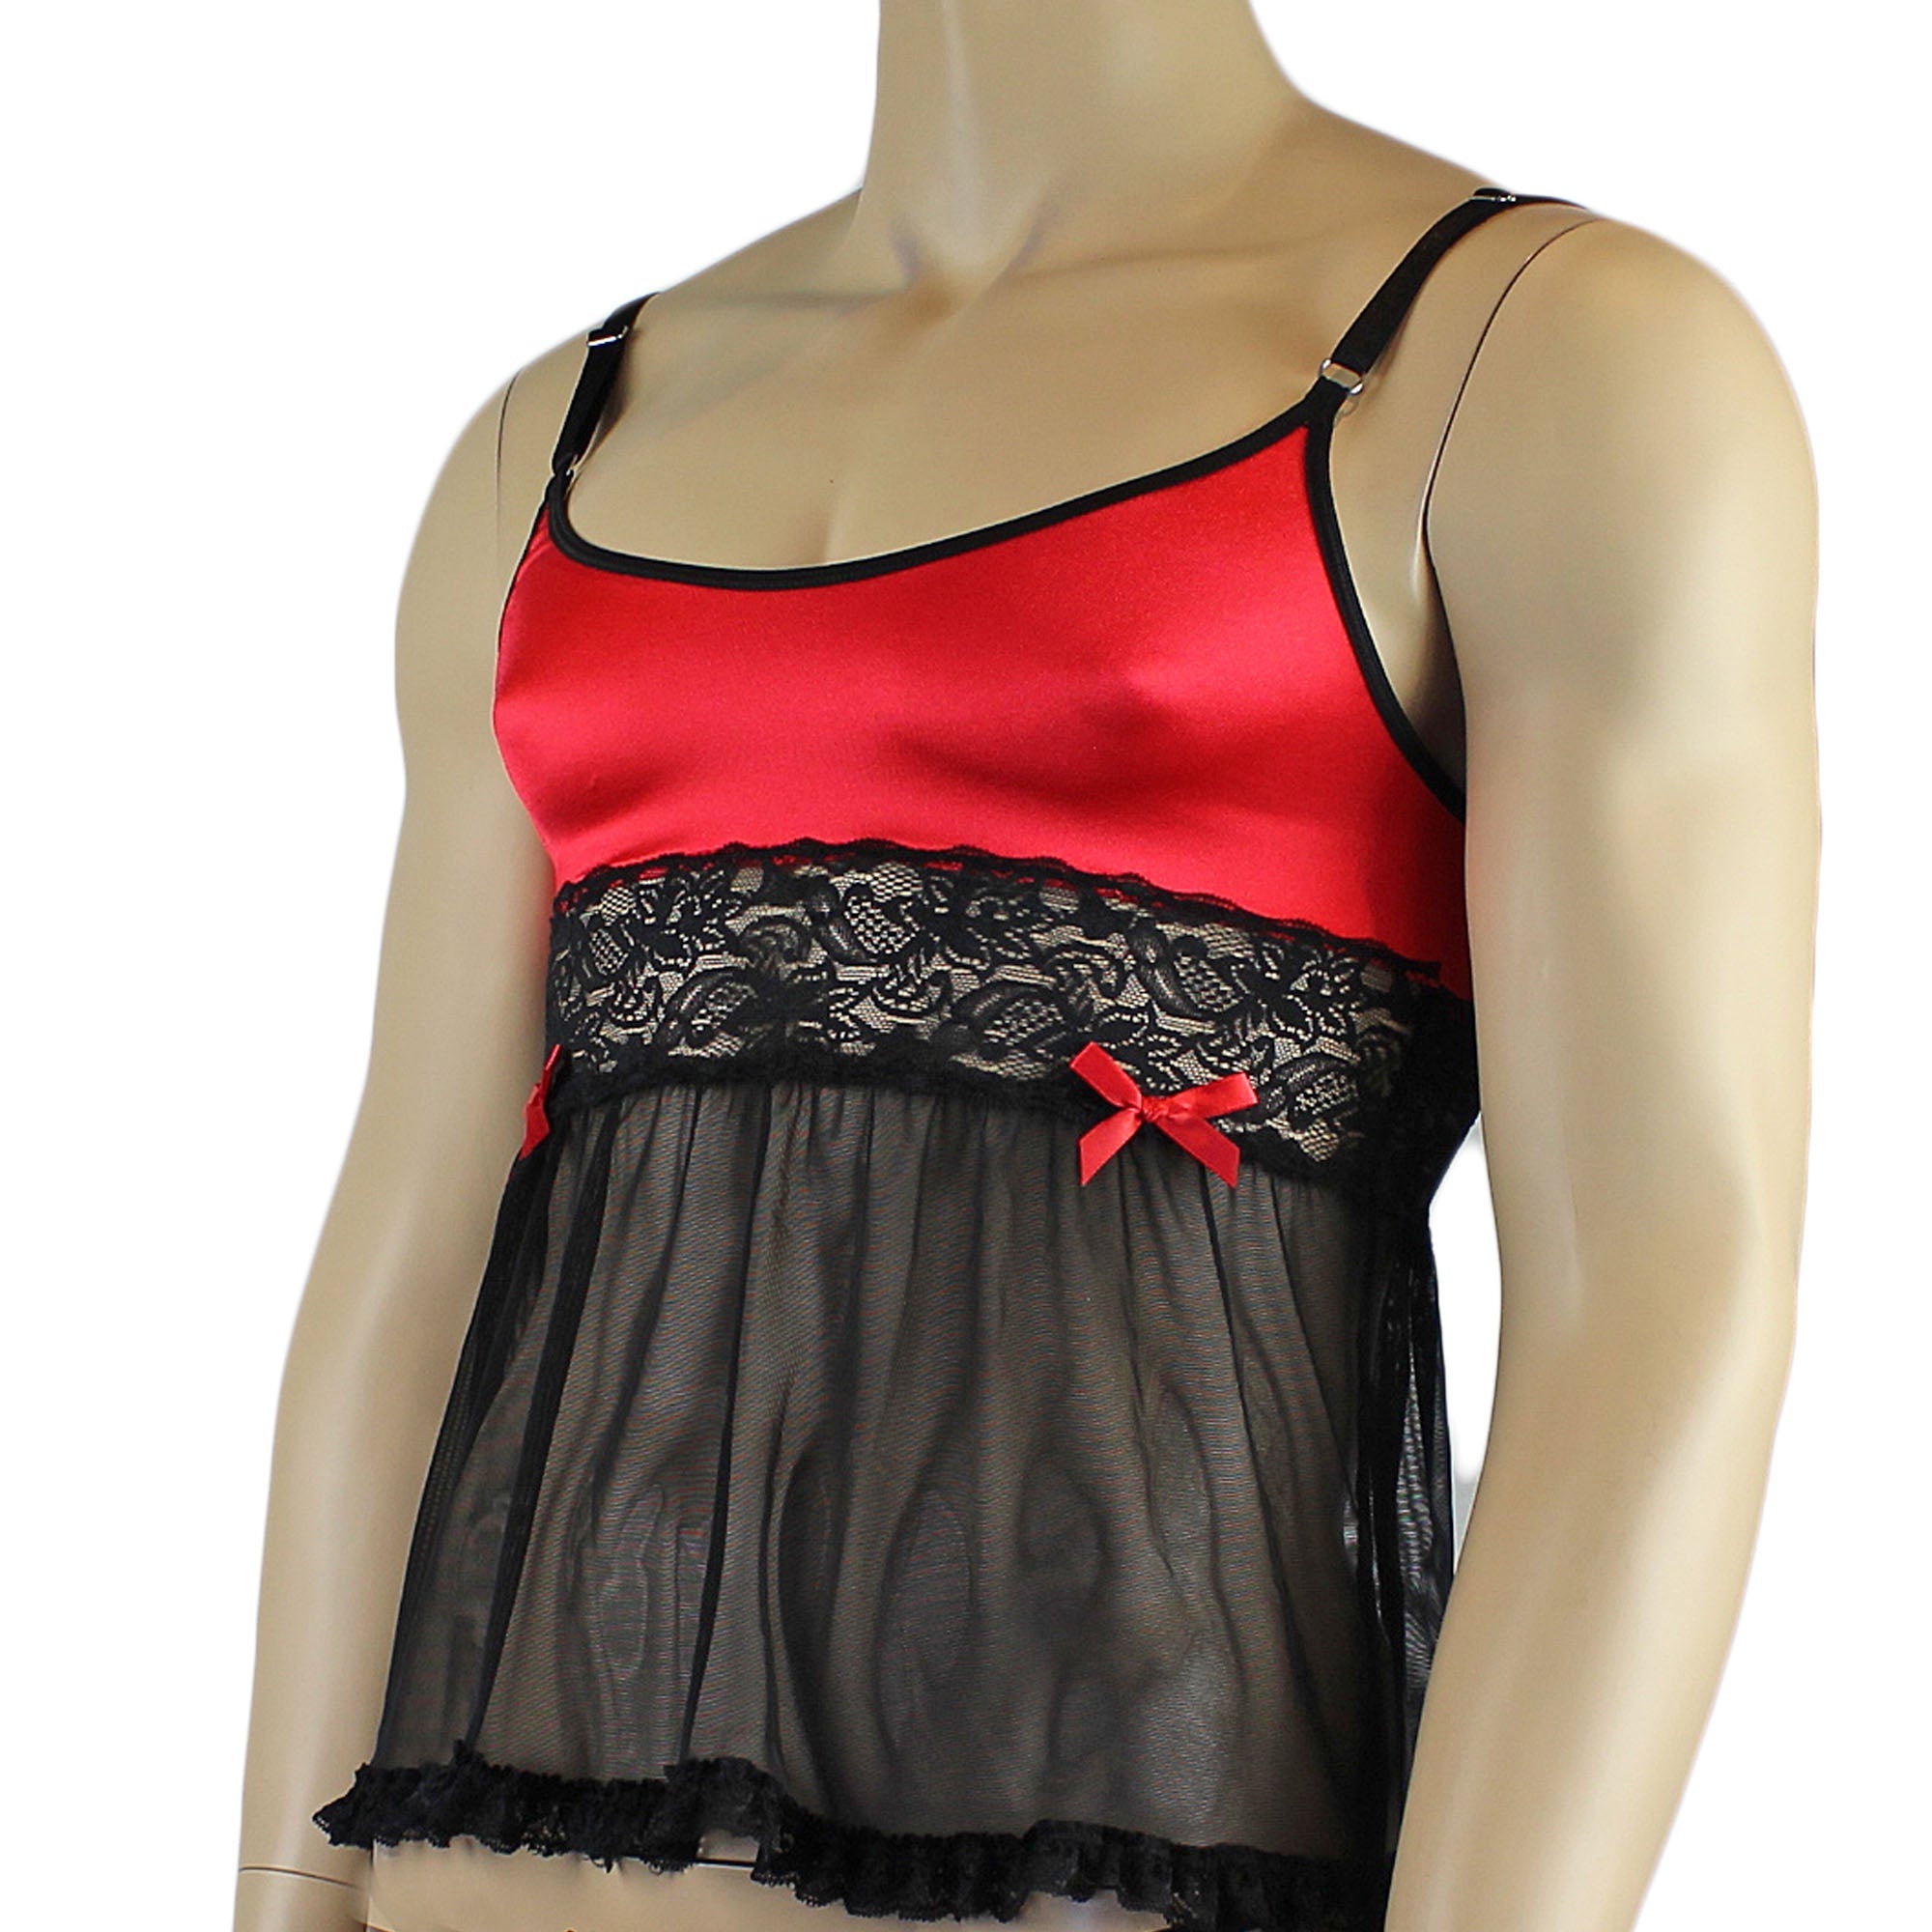 Mens Joanne Mini Babydoll Camisole - Sizes up to 3XL Red & Black Lace